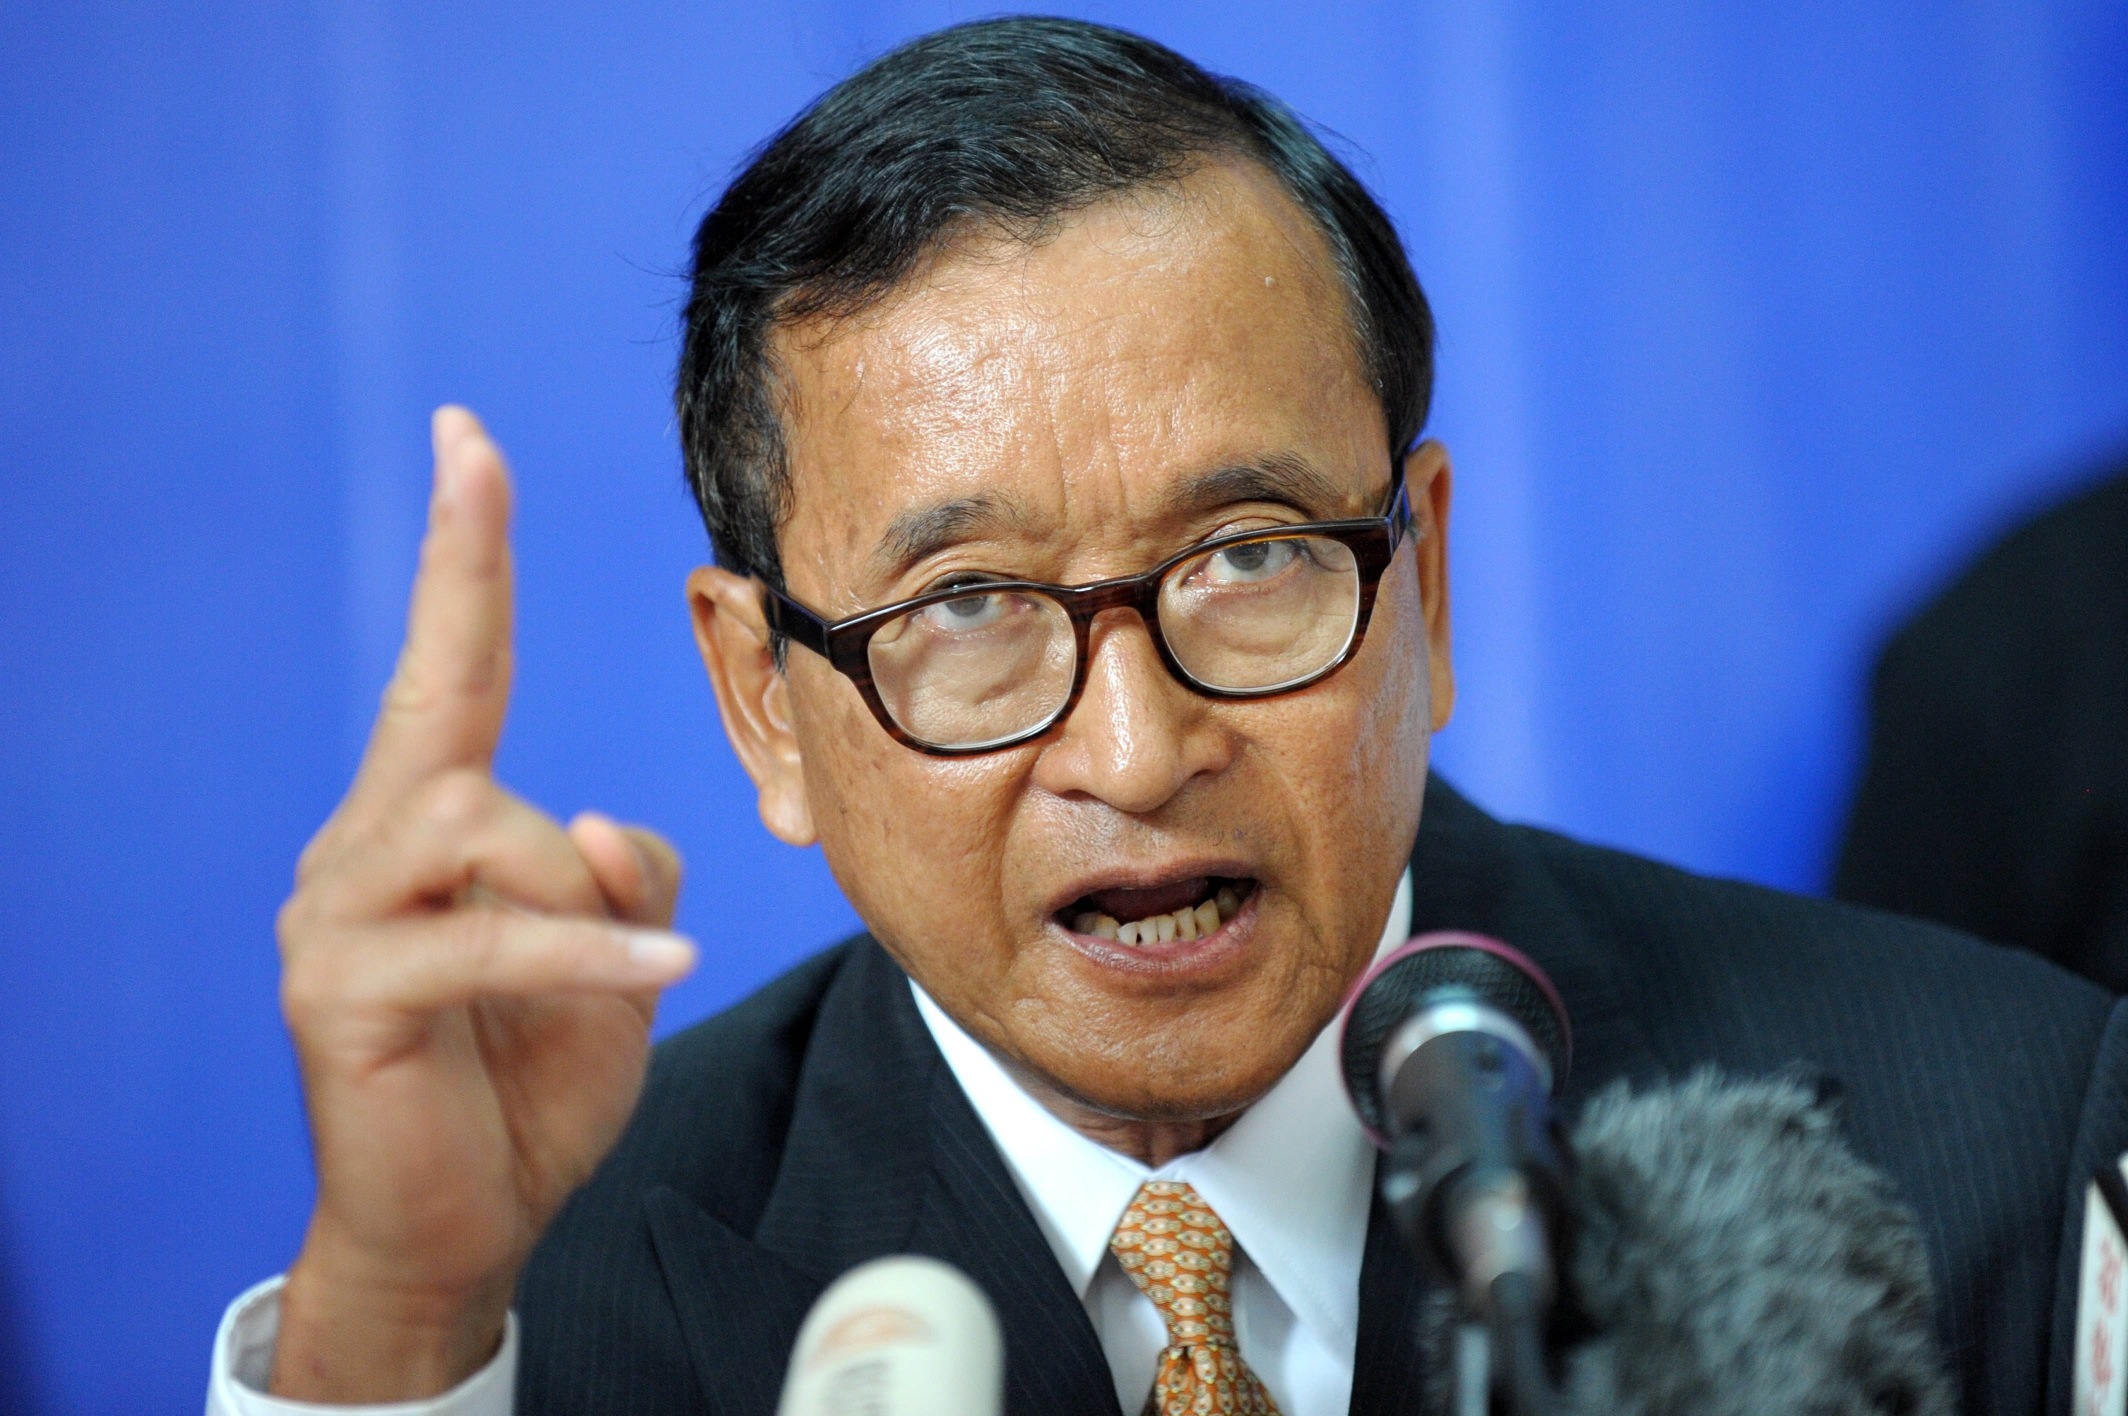 Leader of the opposition Cambodia National Rescue Party (CNRP), Sam Rainsy speaks during a press conference in Phnom Penh. Photo: AFP